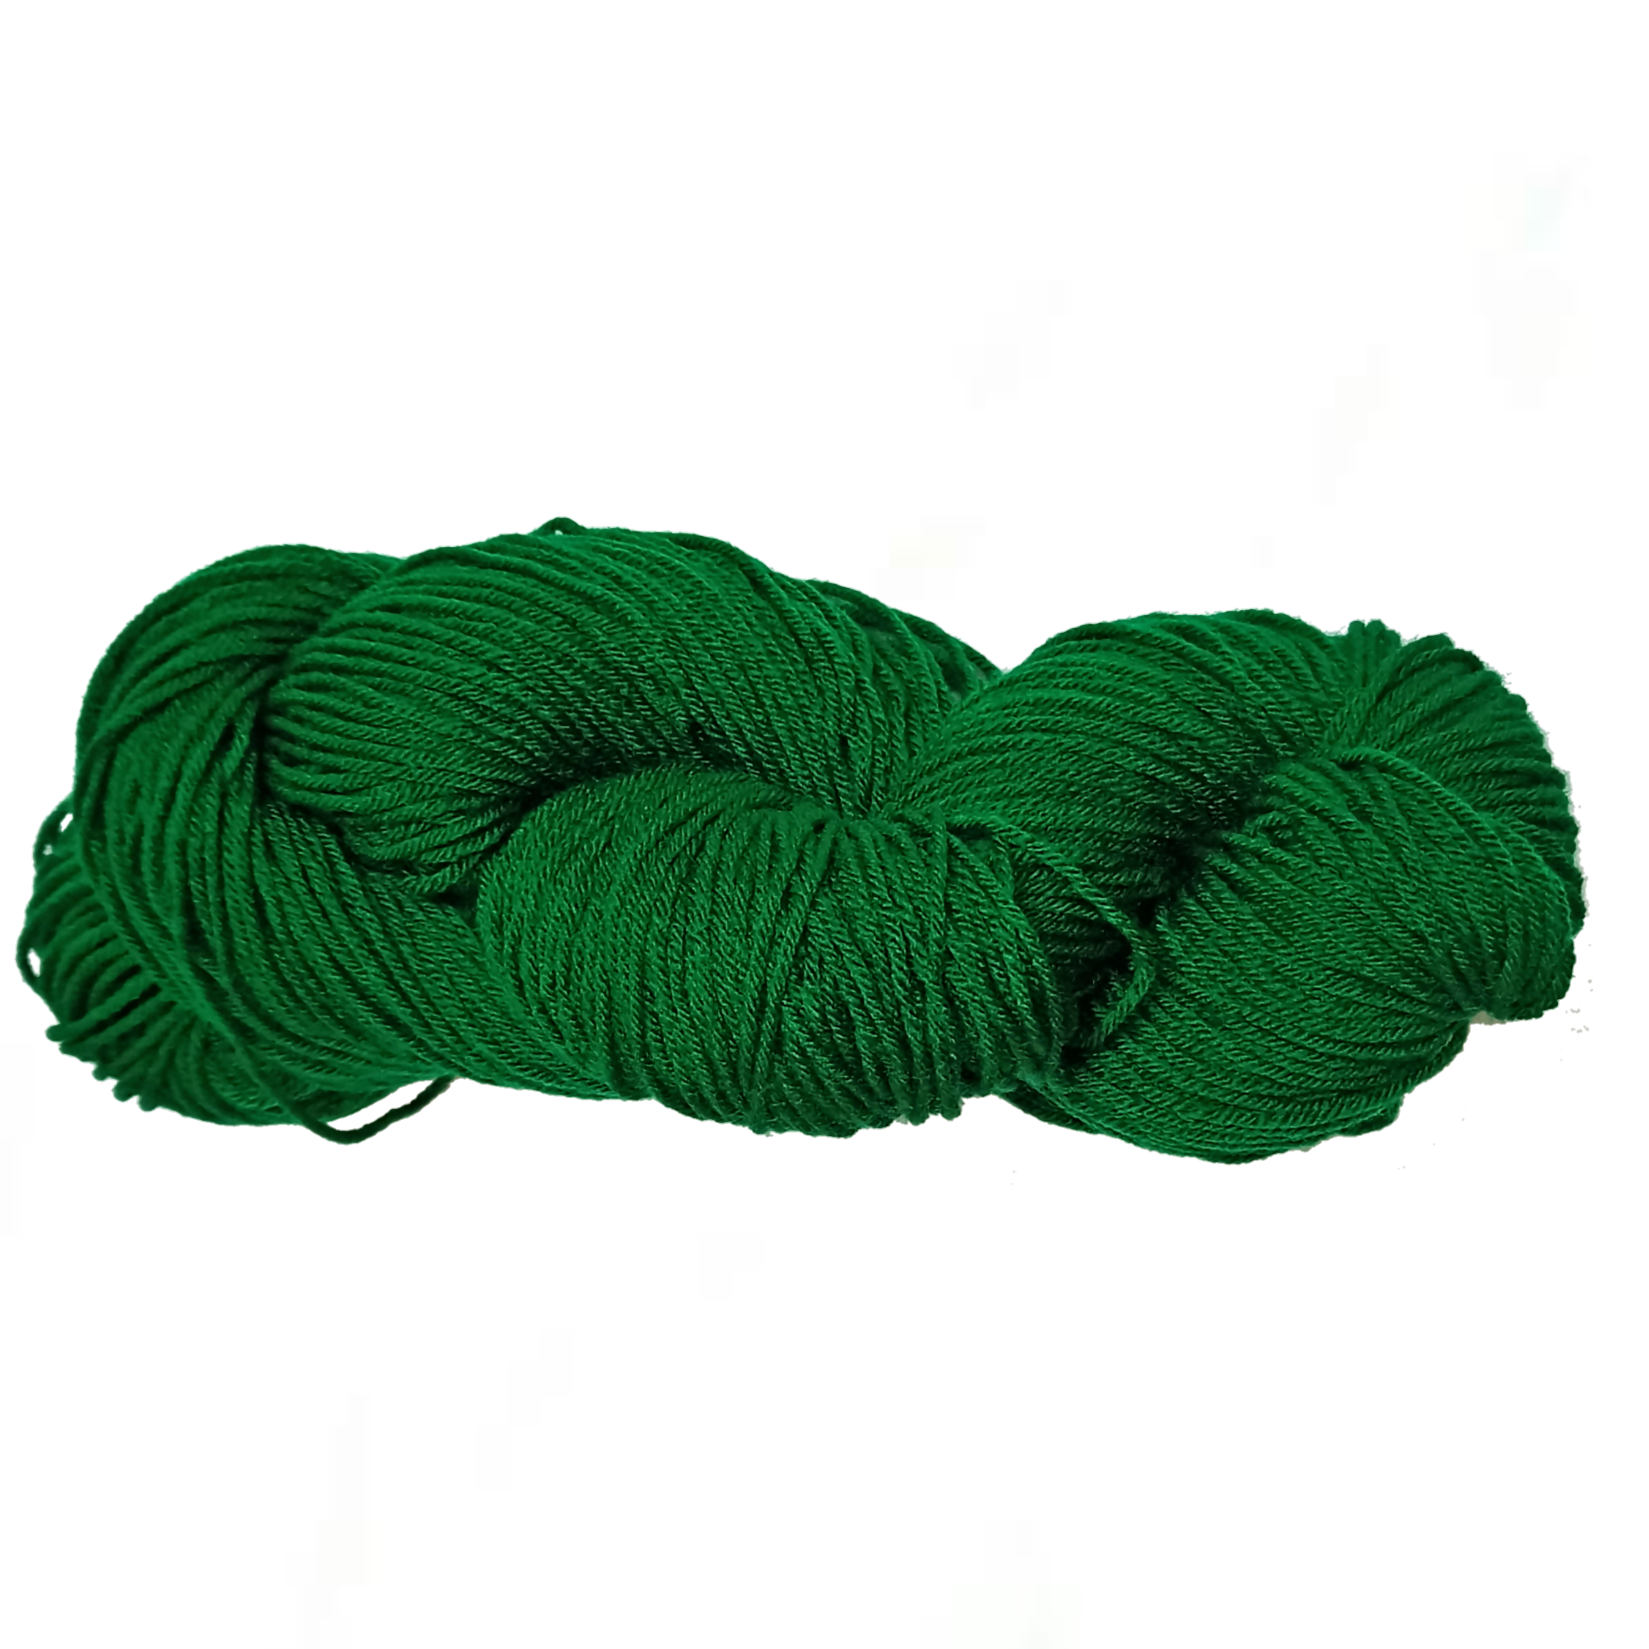 https://ritikacraft.in/wp-content/uploads/2021/07/4-ply-green-wool-2.png